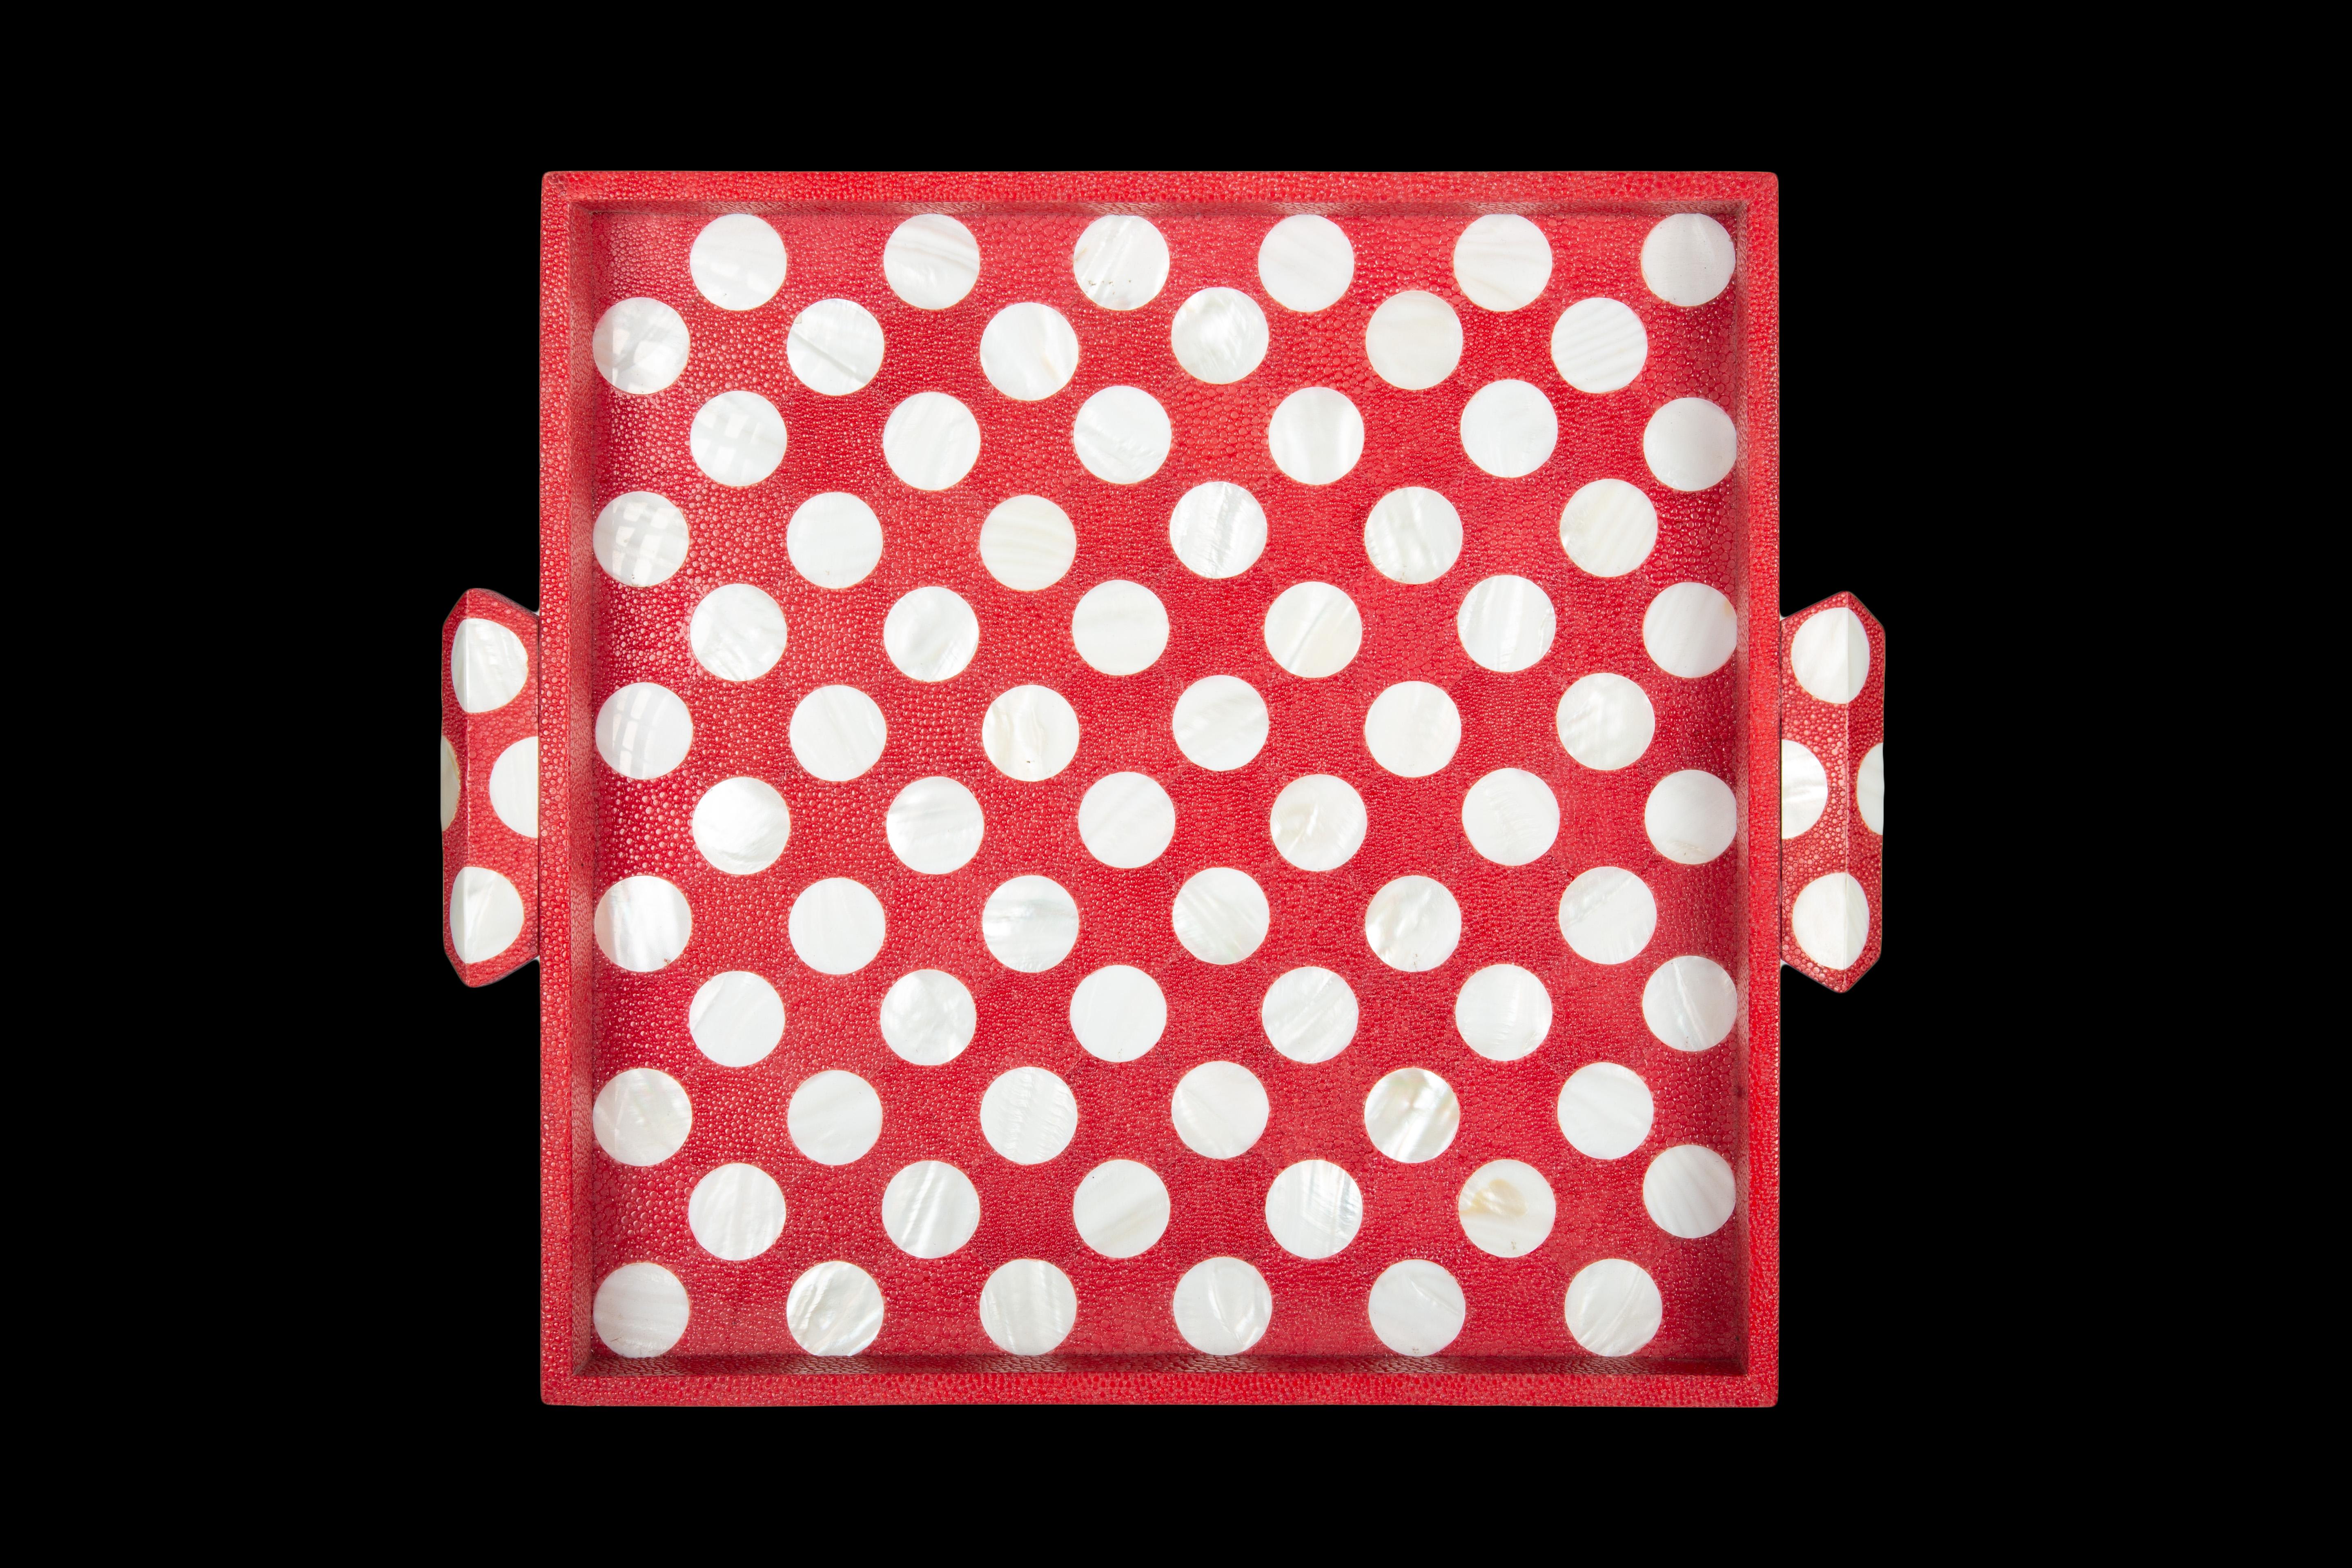 Red Polka dot Shagreen and Mother of pearl square tray

Measures: 12